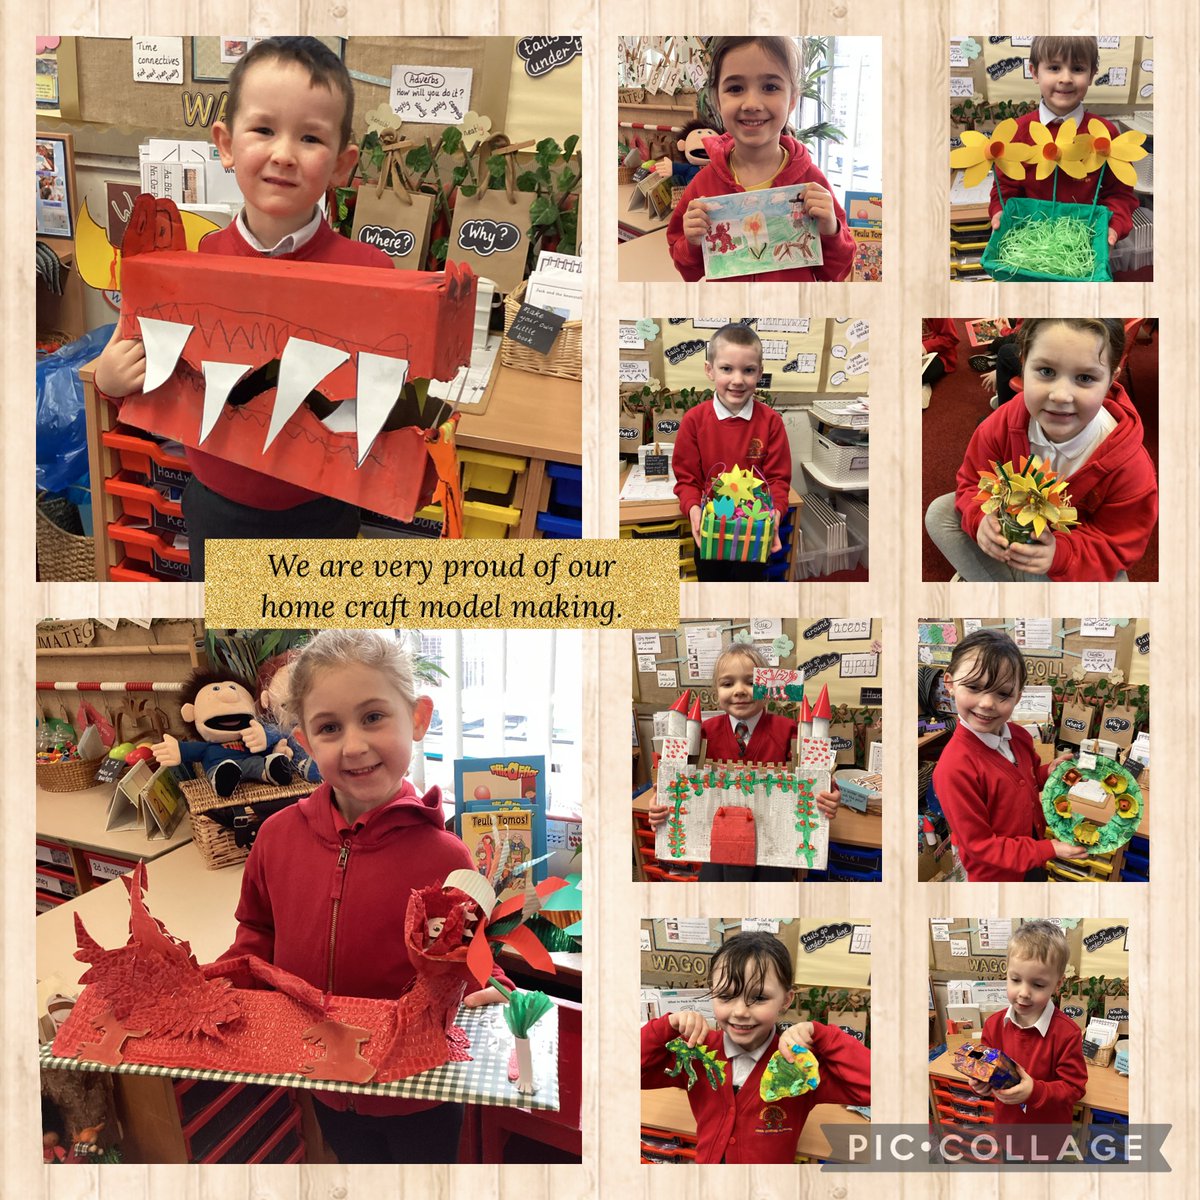 Welsh week is off to a great start, a carousel of activities  to celebrate Wonderful Wales. Ardderchog Dosbarth Ebbw @GlyncoedP #GPSREACH